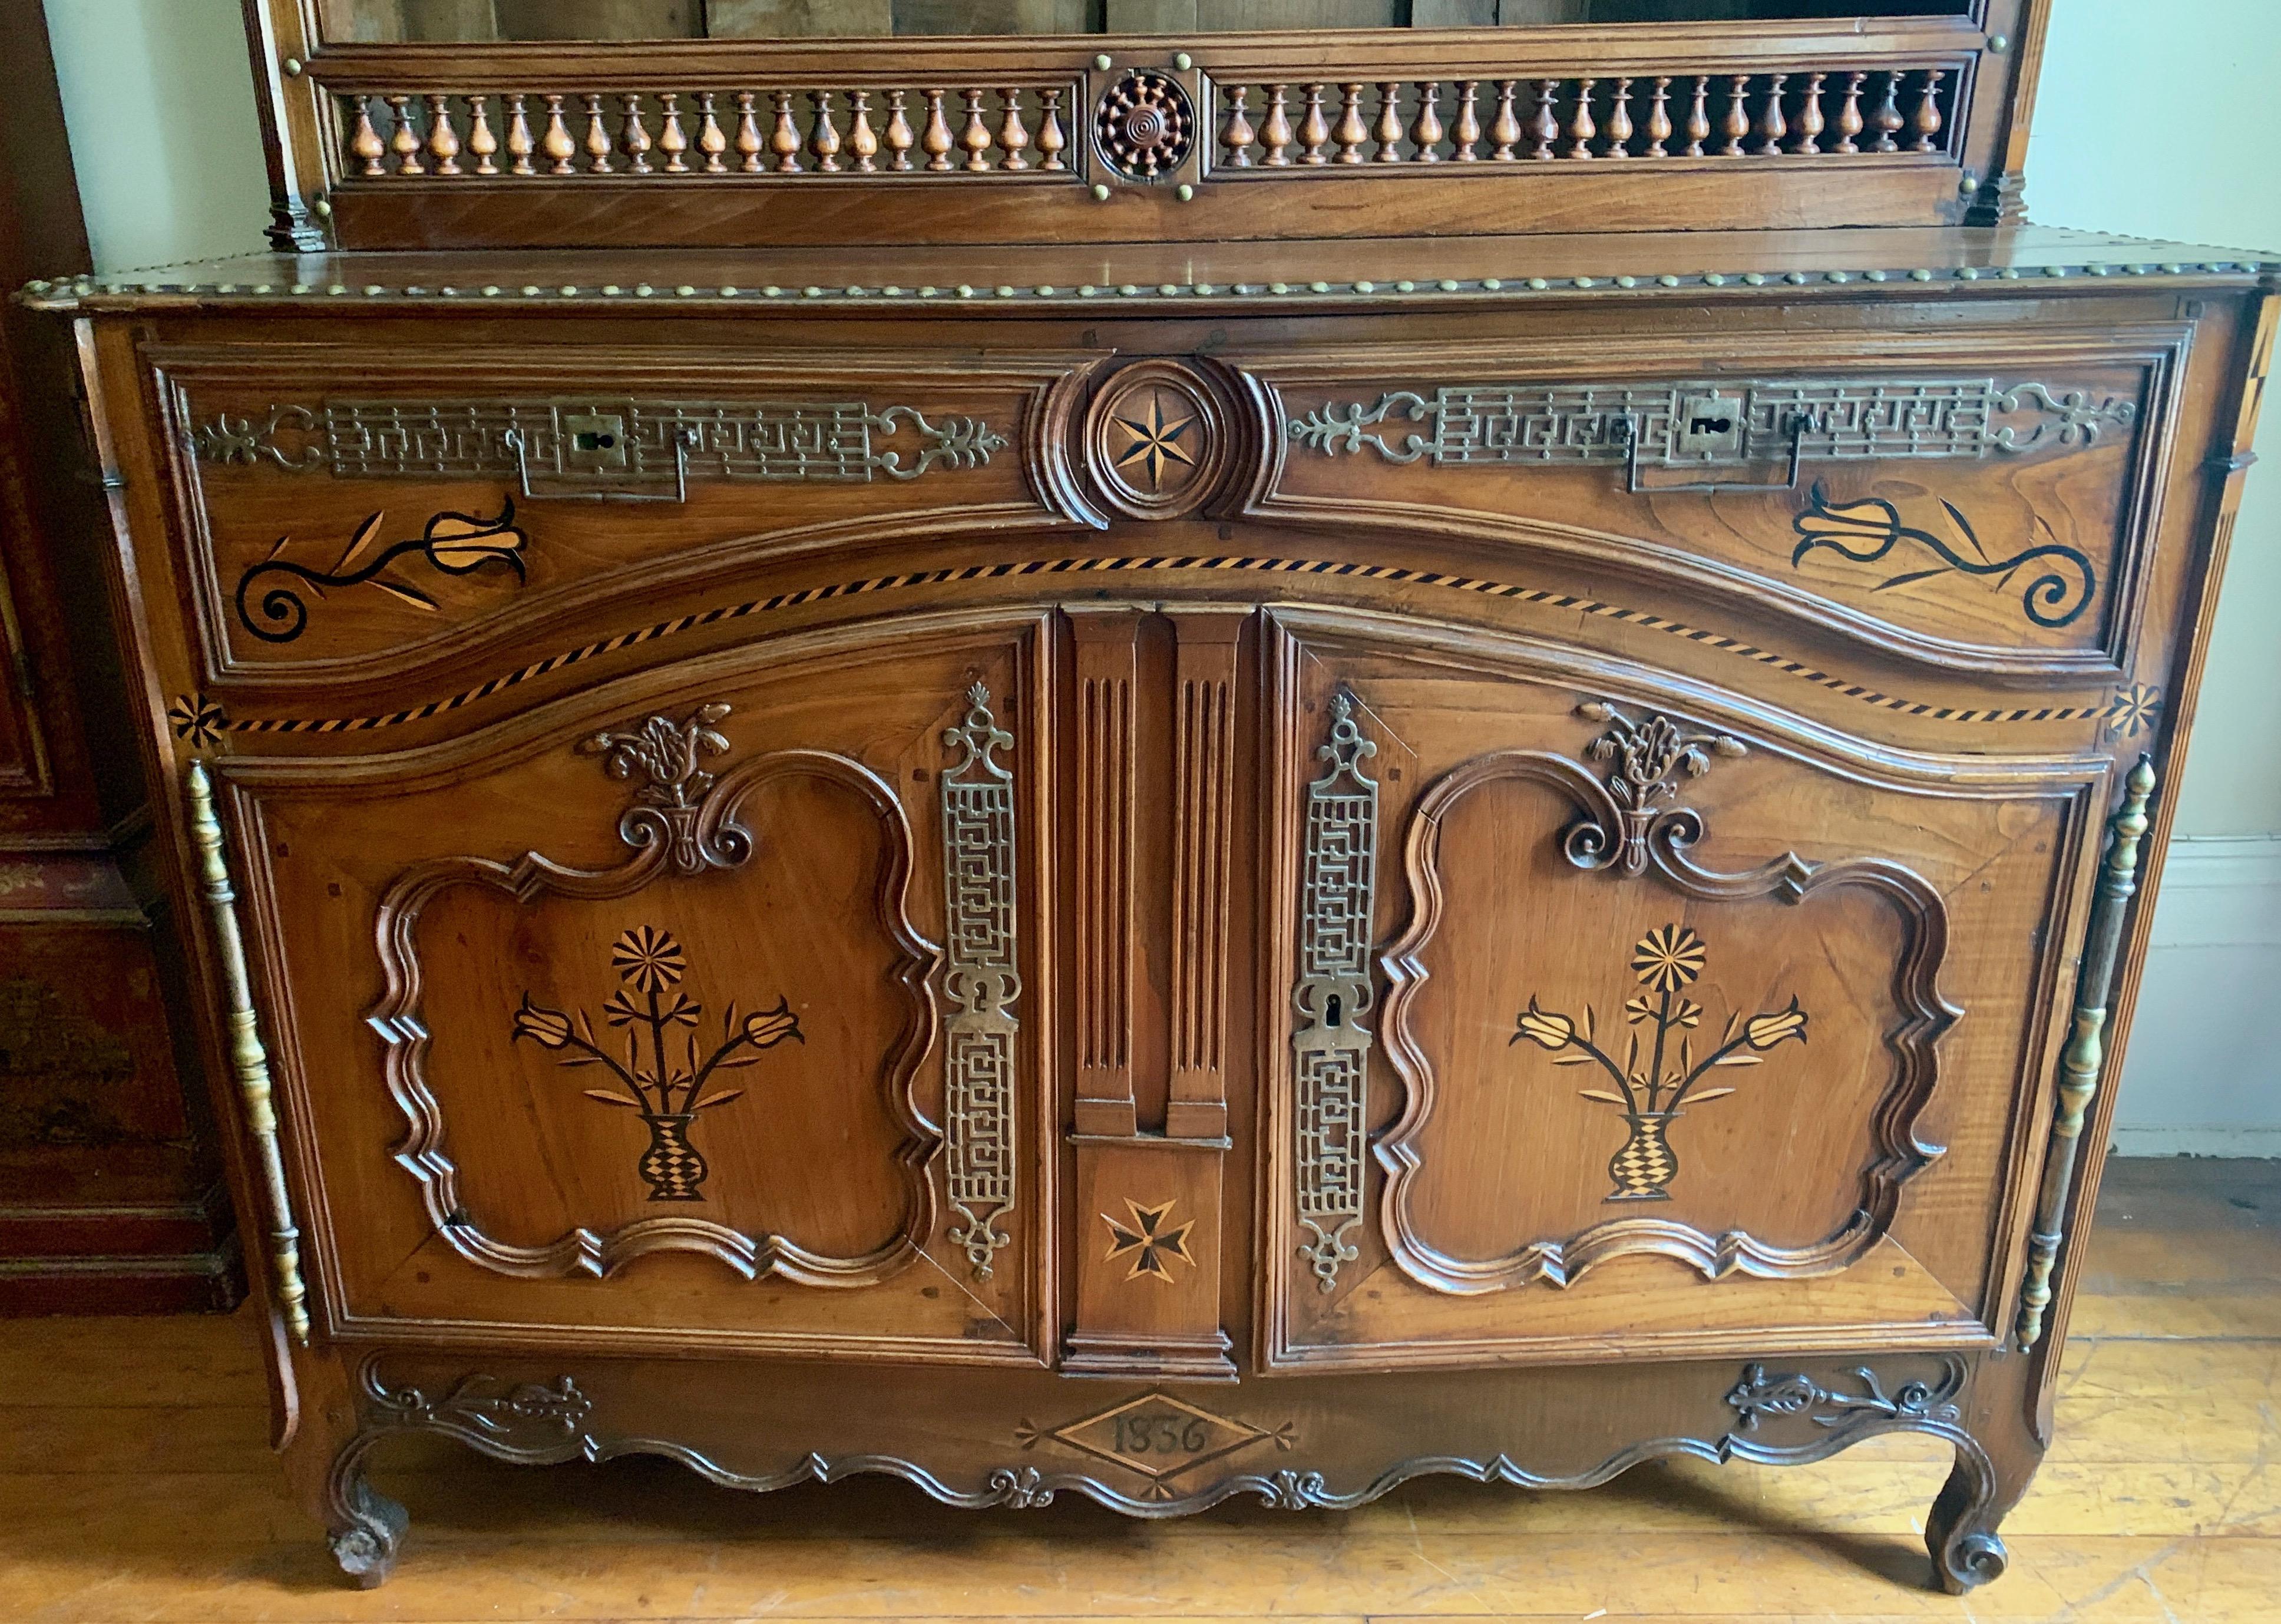 Antiques from the Brittany region are always popular with our customers. This cabinet is sturdy and 